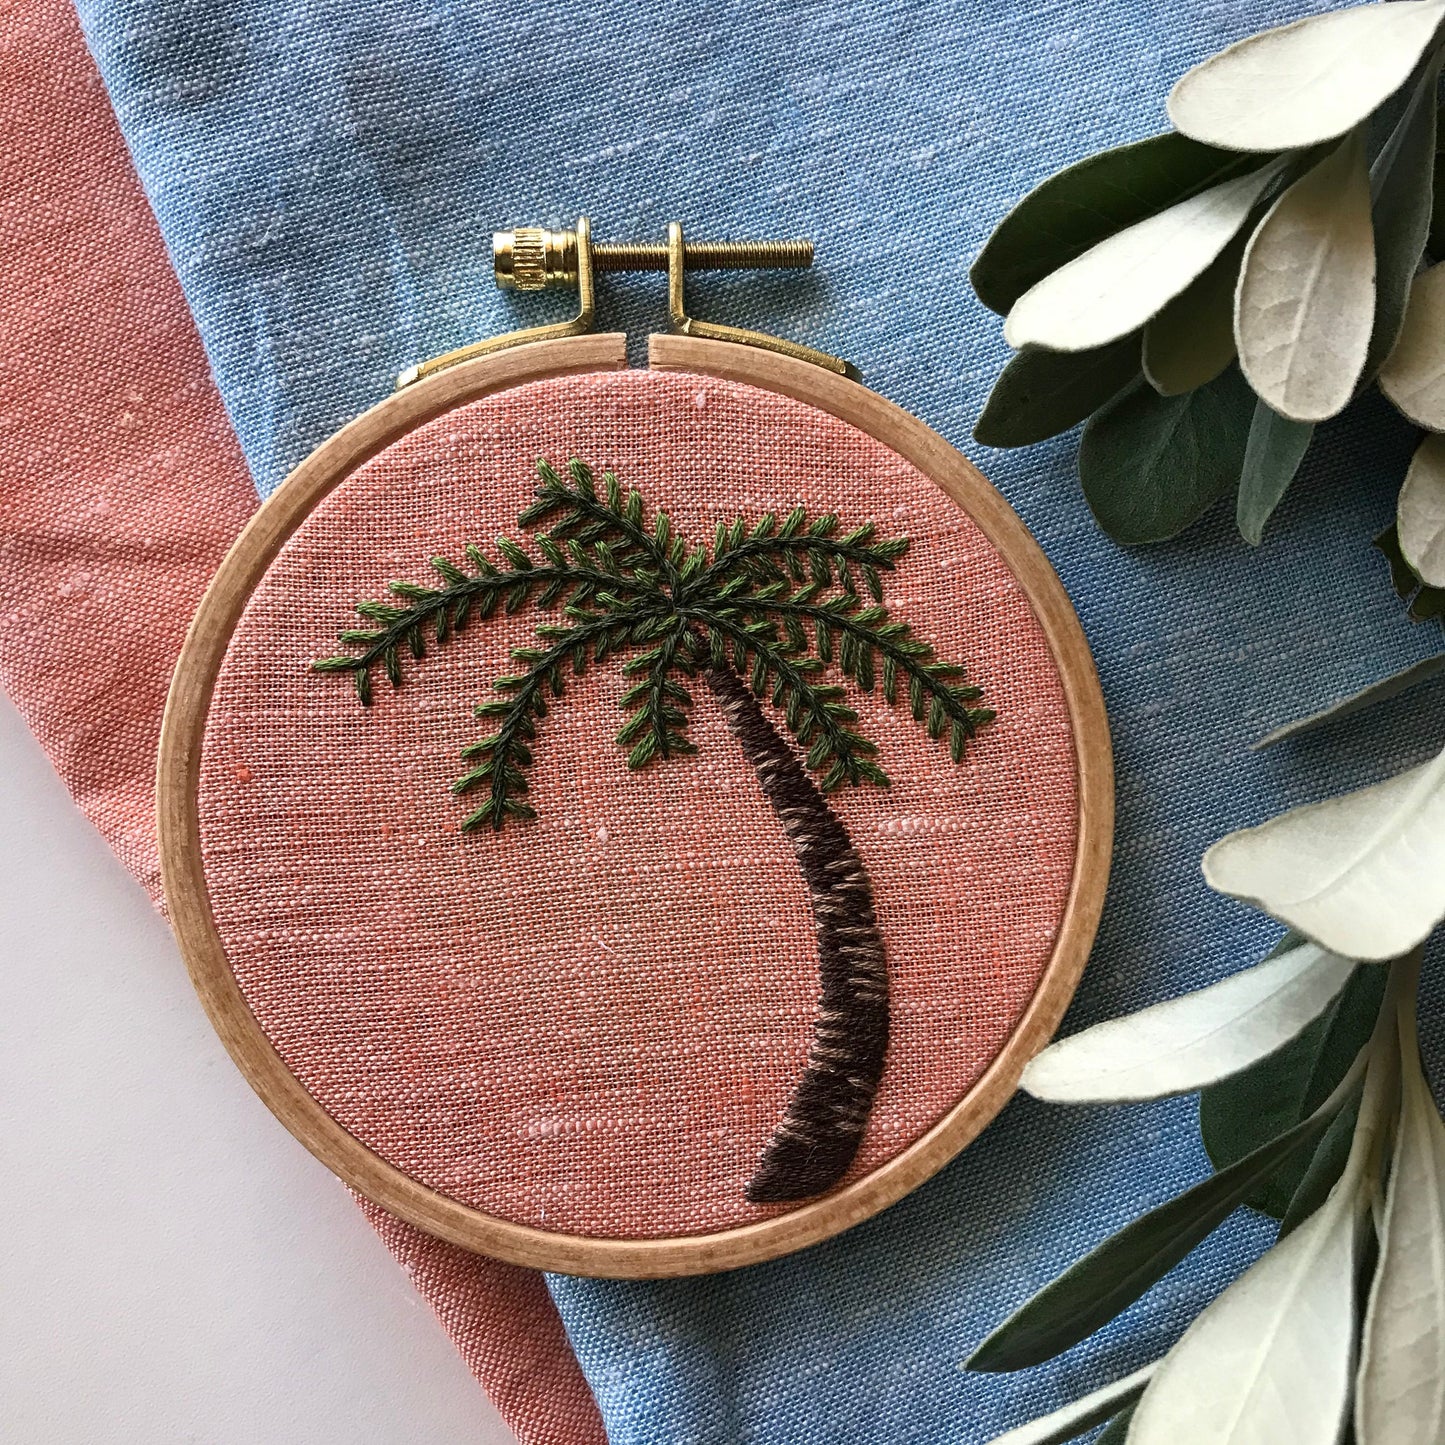 Palm Tree: Beginner Embroidery Kit